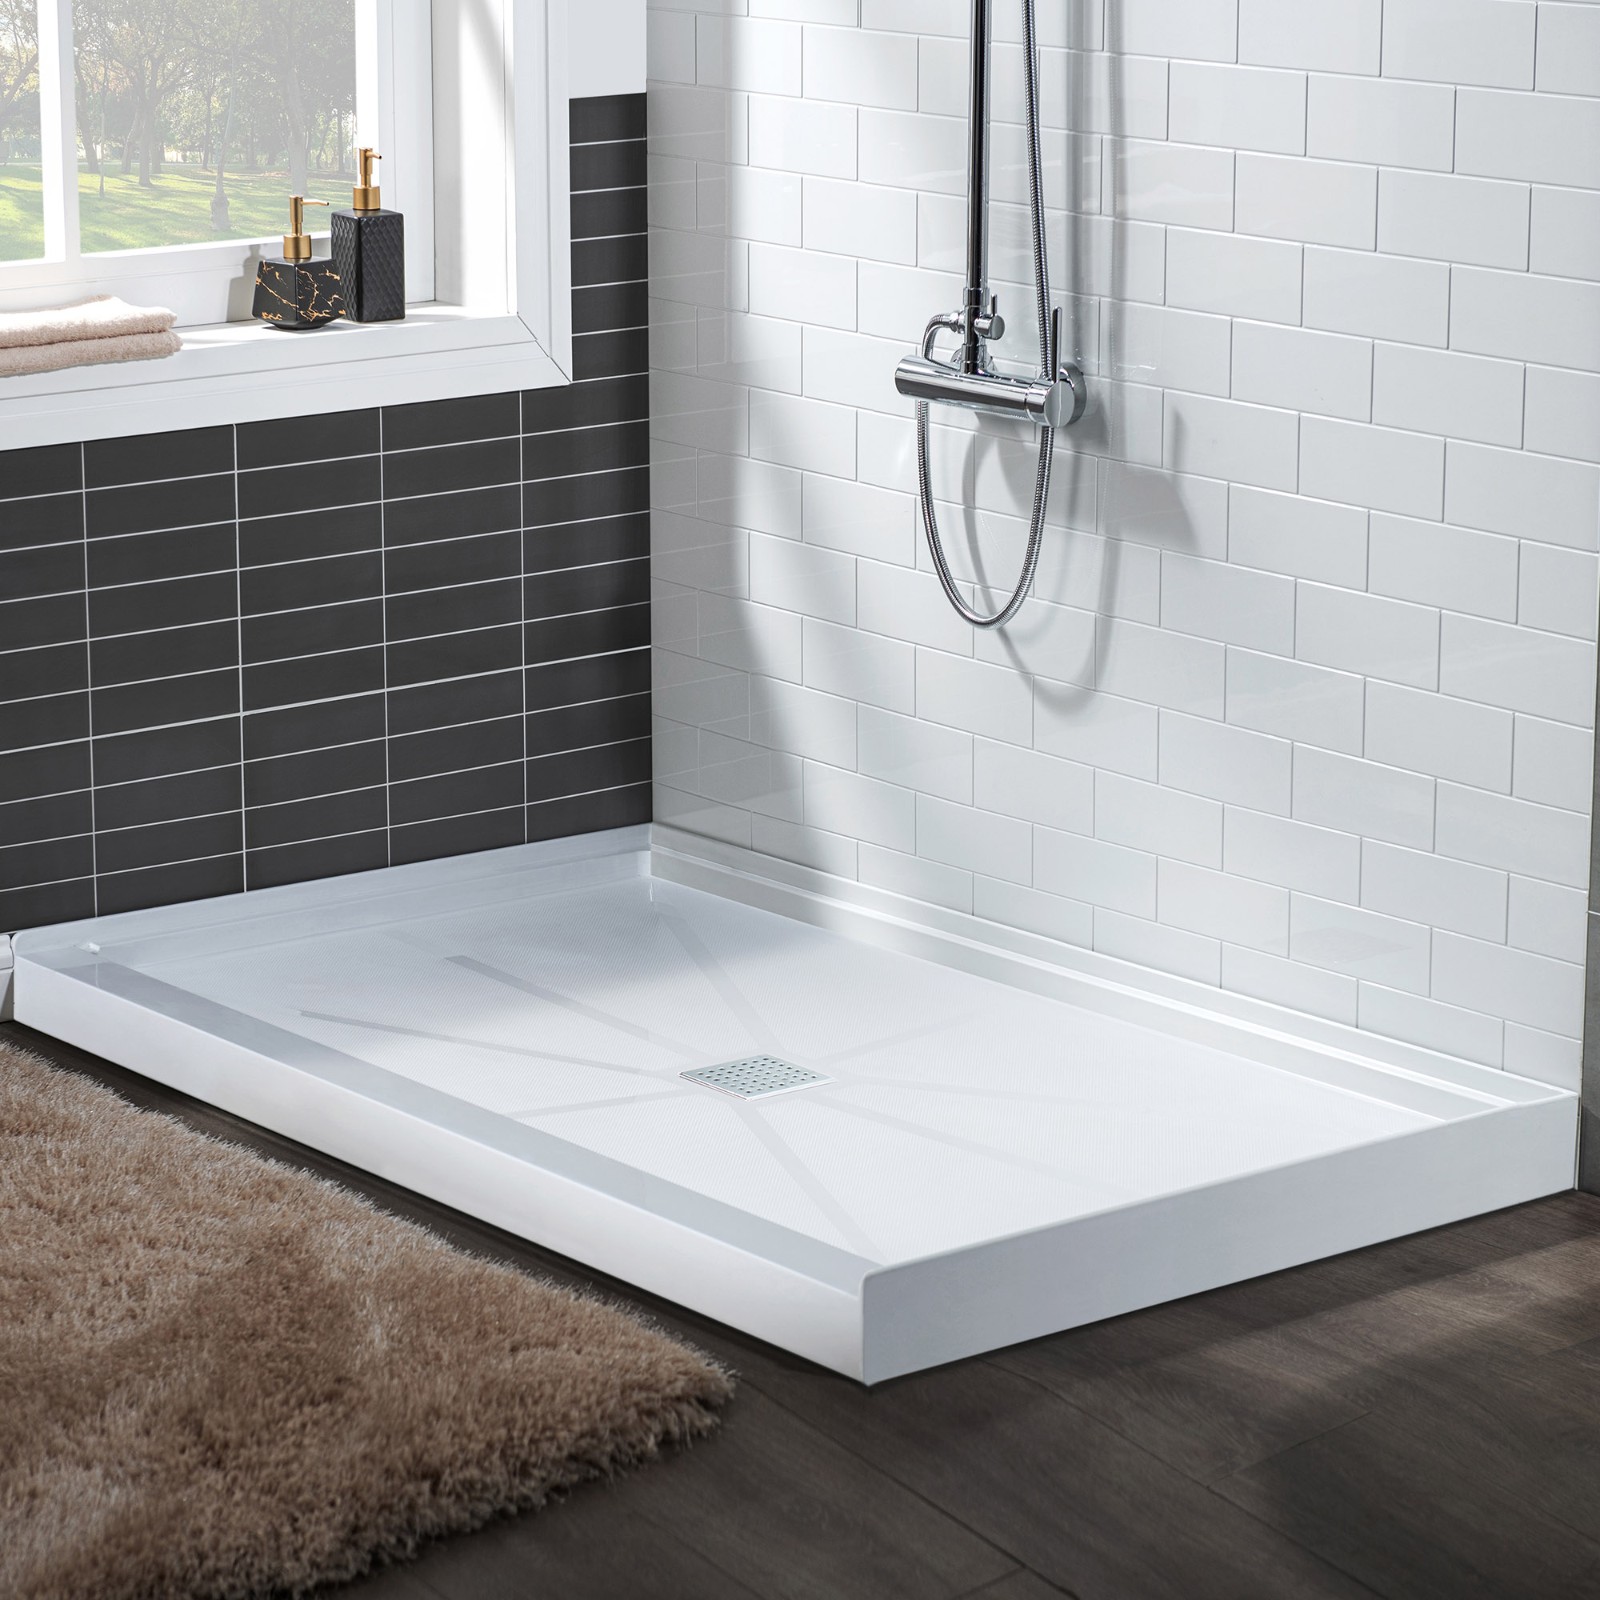  WOODBRIDGE SBR6034-1000C-CH SolidSurface Shower Base with Recessed Trench Side Including  Chrome Linear Cover, 60